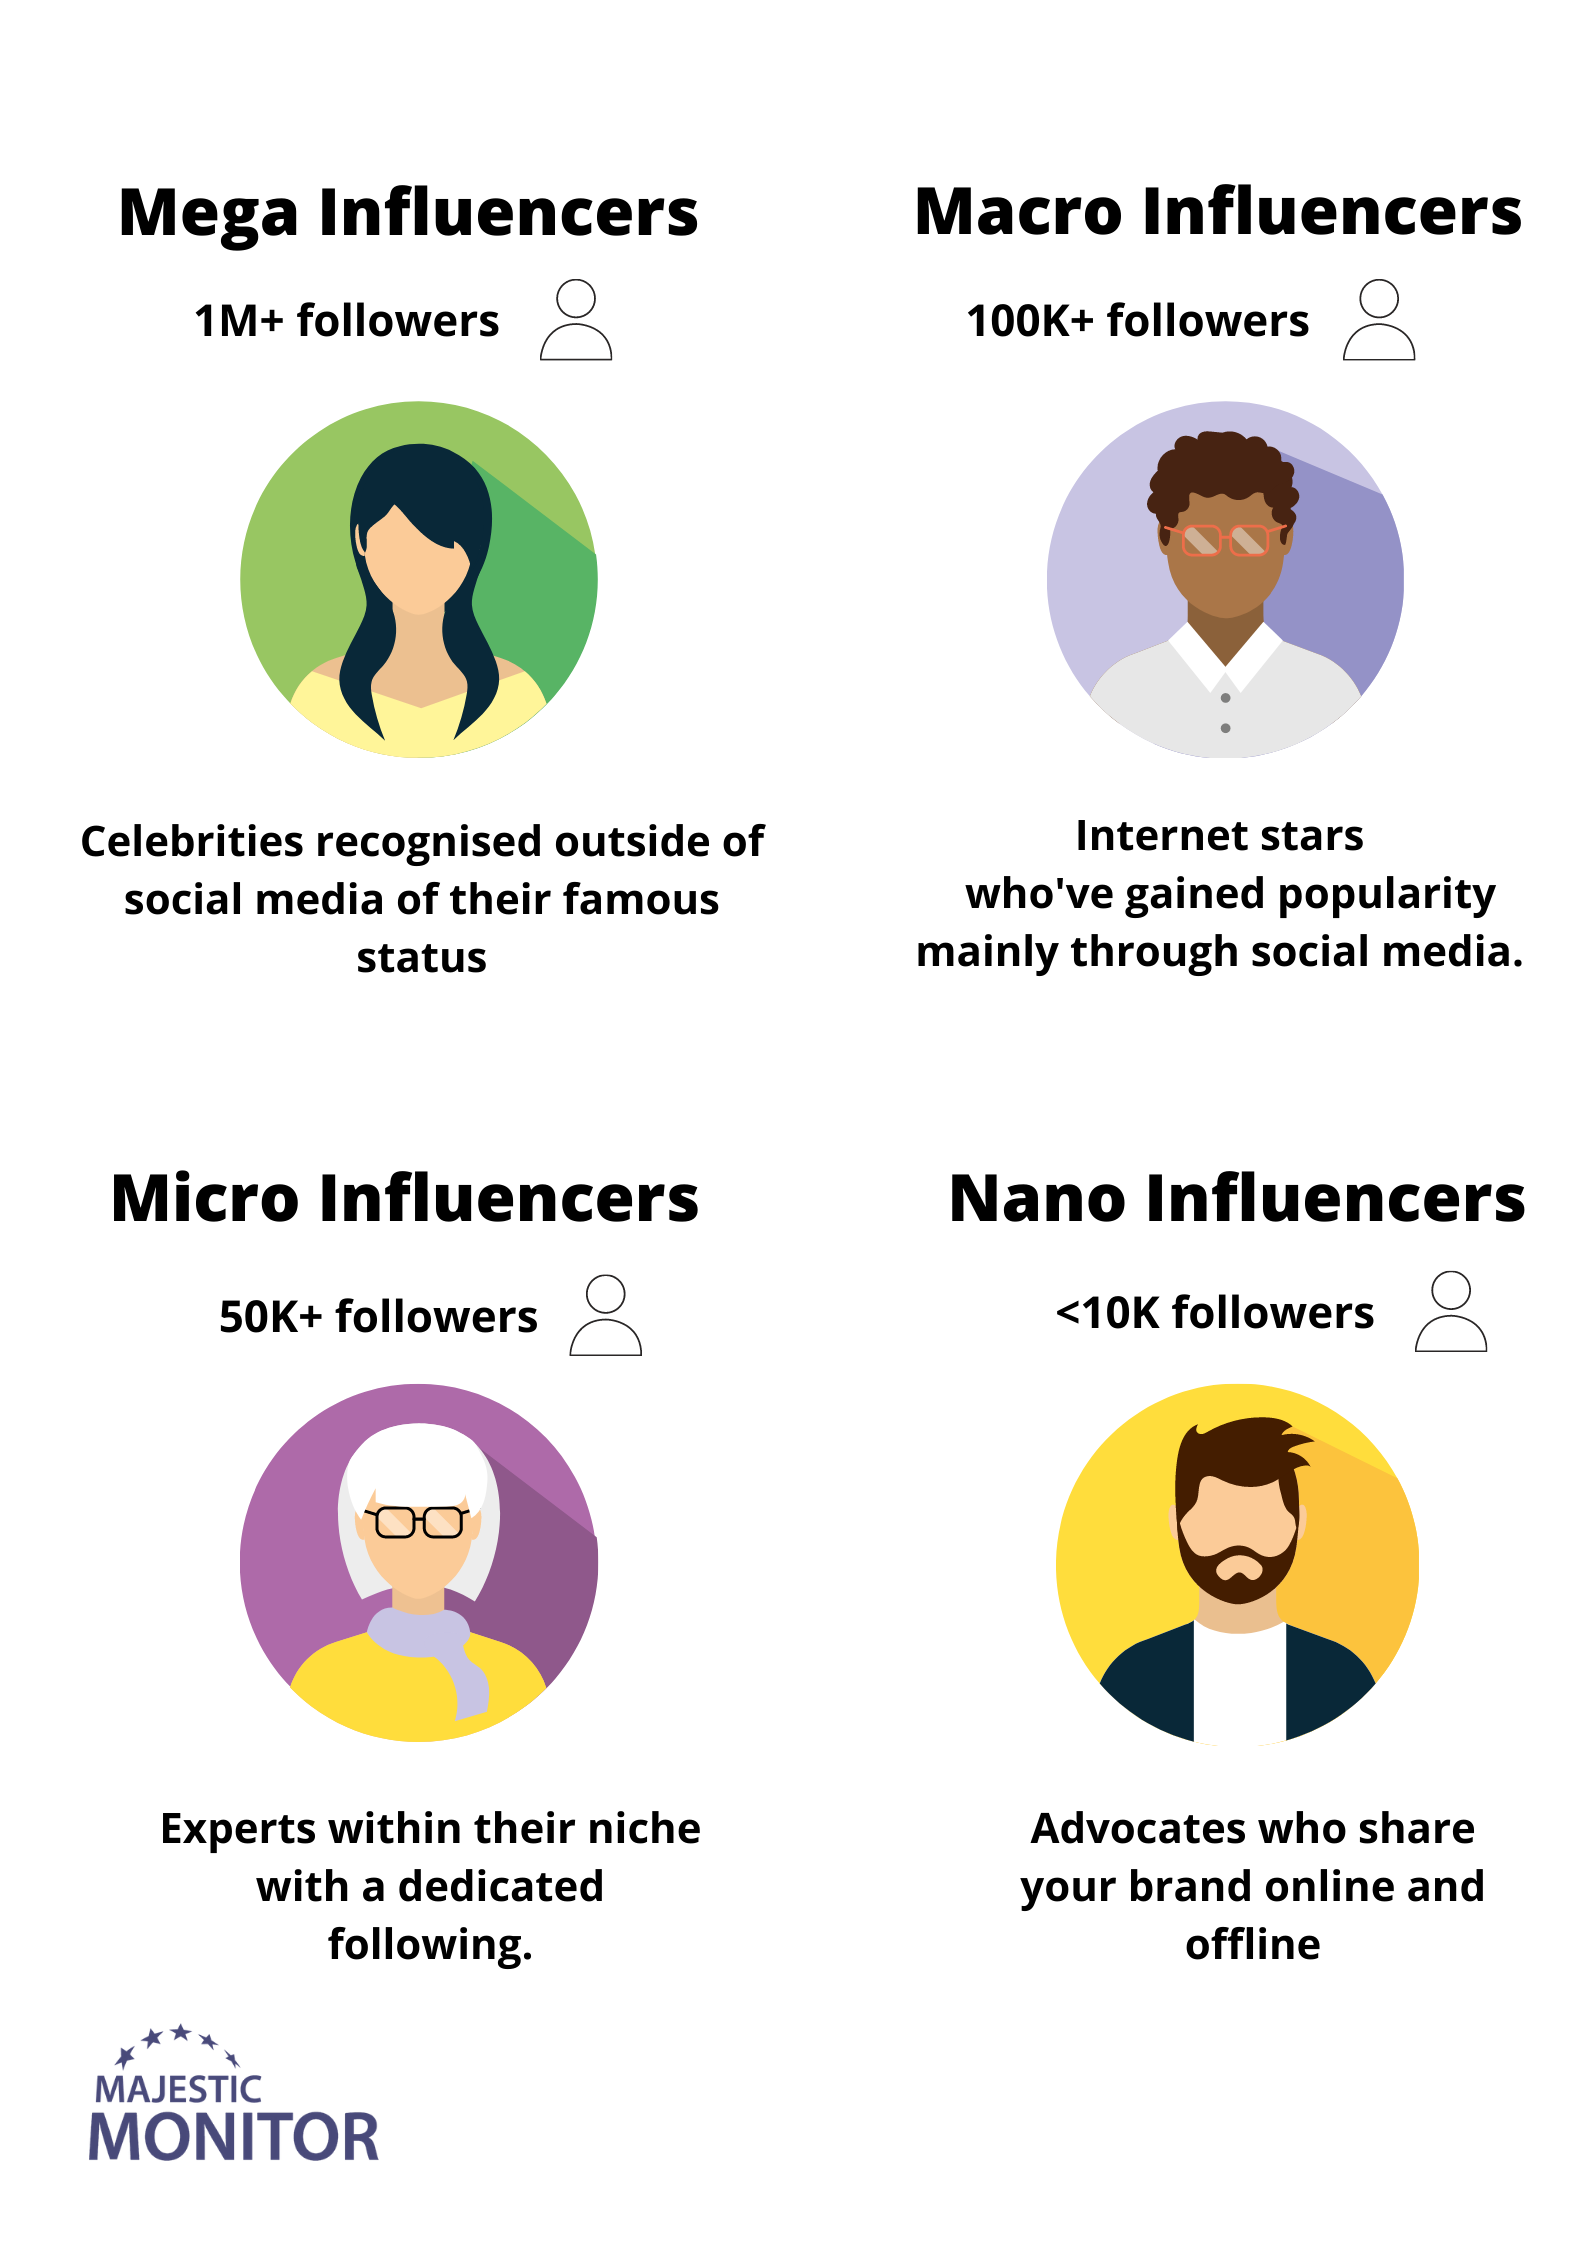 What is Influencer Status?